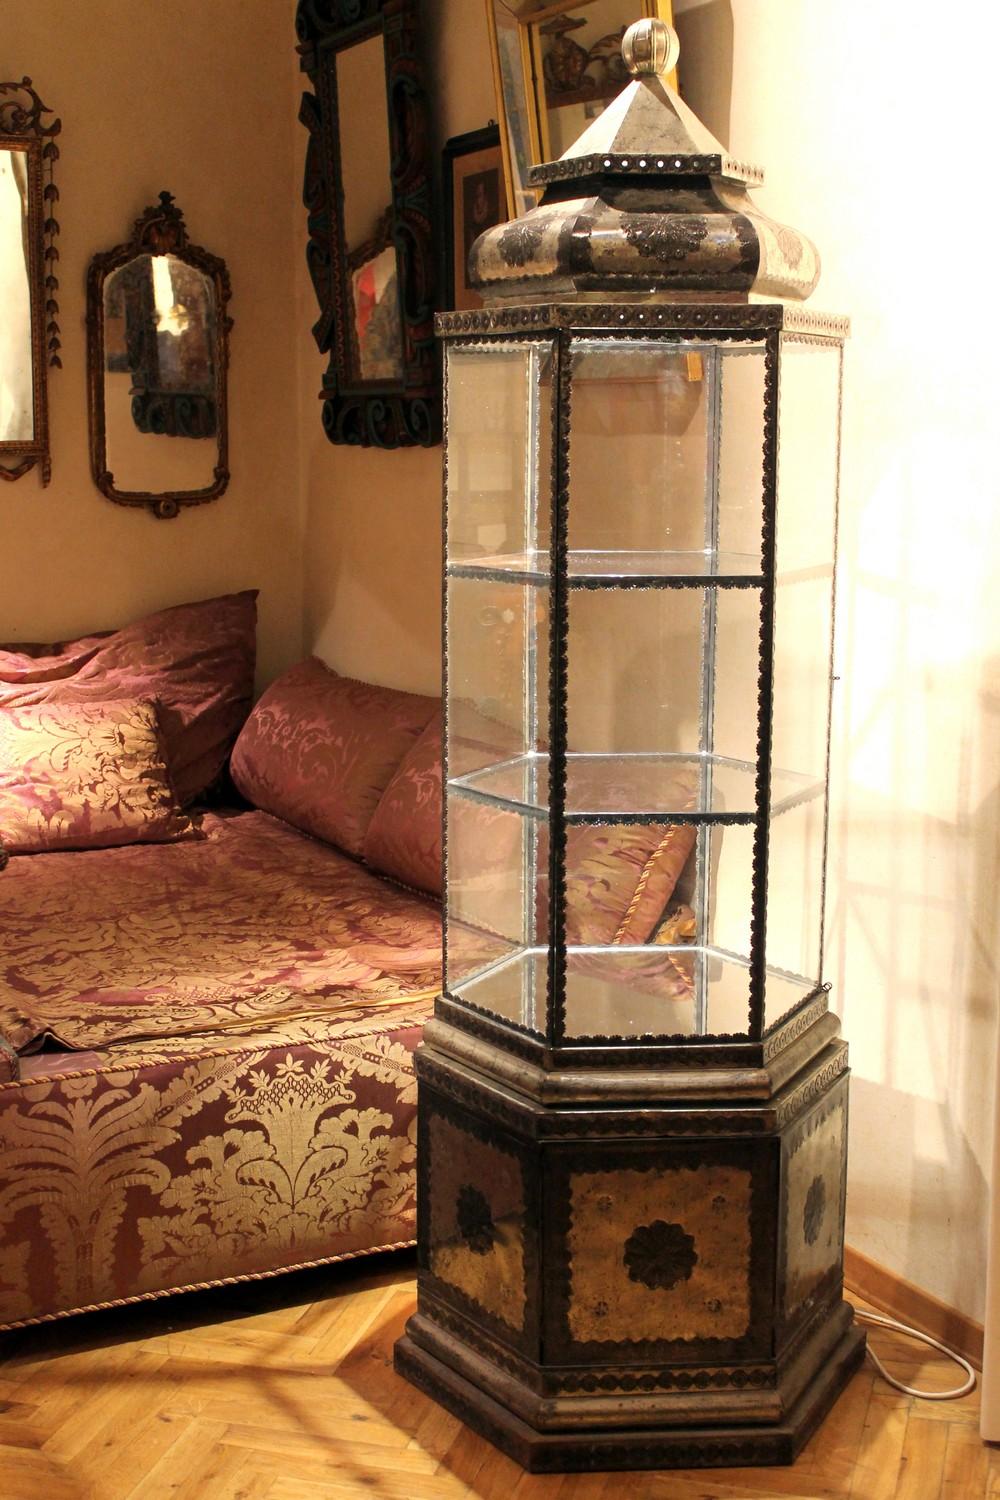 19th Century Islamic Style Silvered Metal and Glass Illuminated Display Cabinet with Shelves